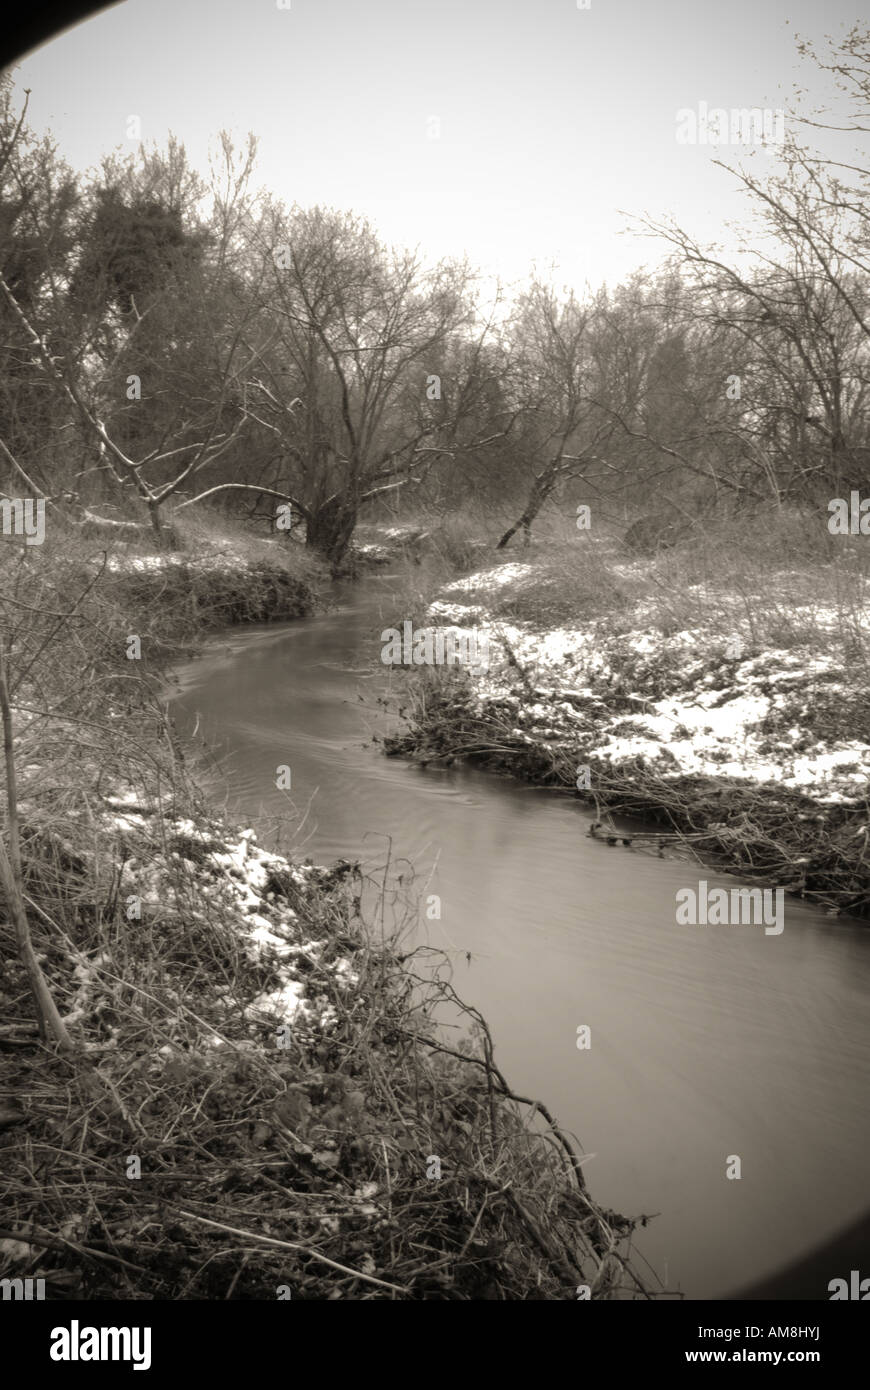 A small flowing river stream on a snowing winters day Stock Photo